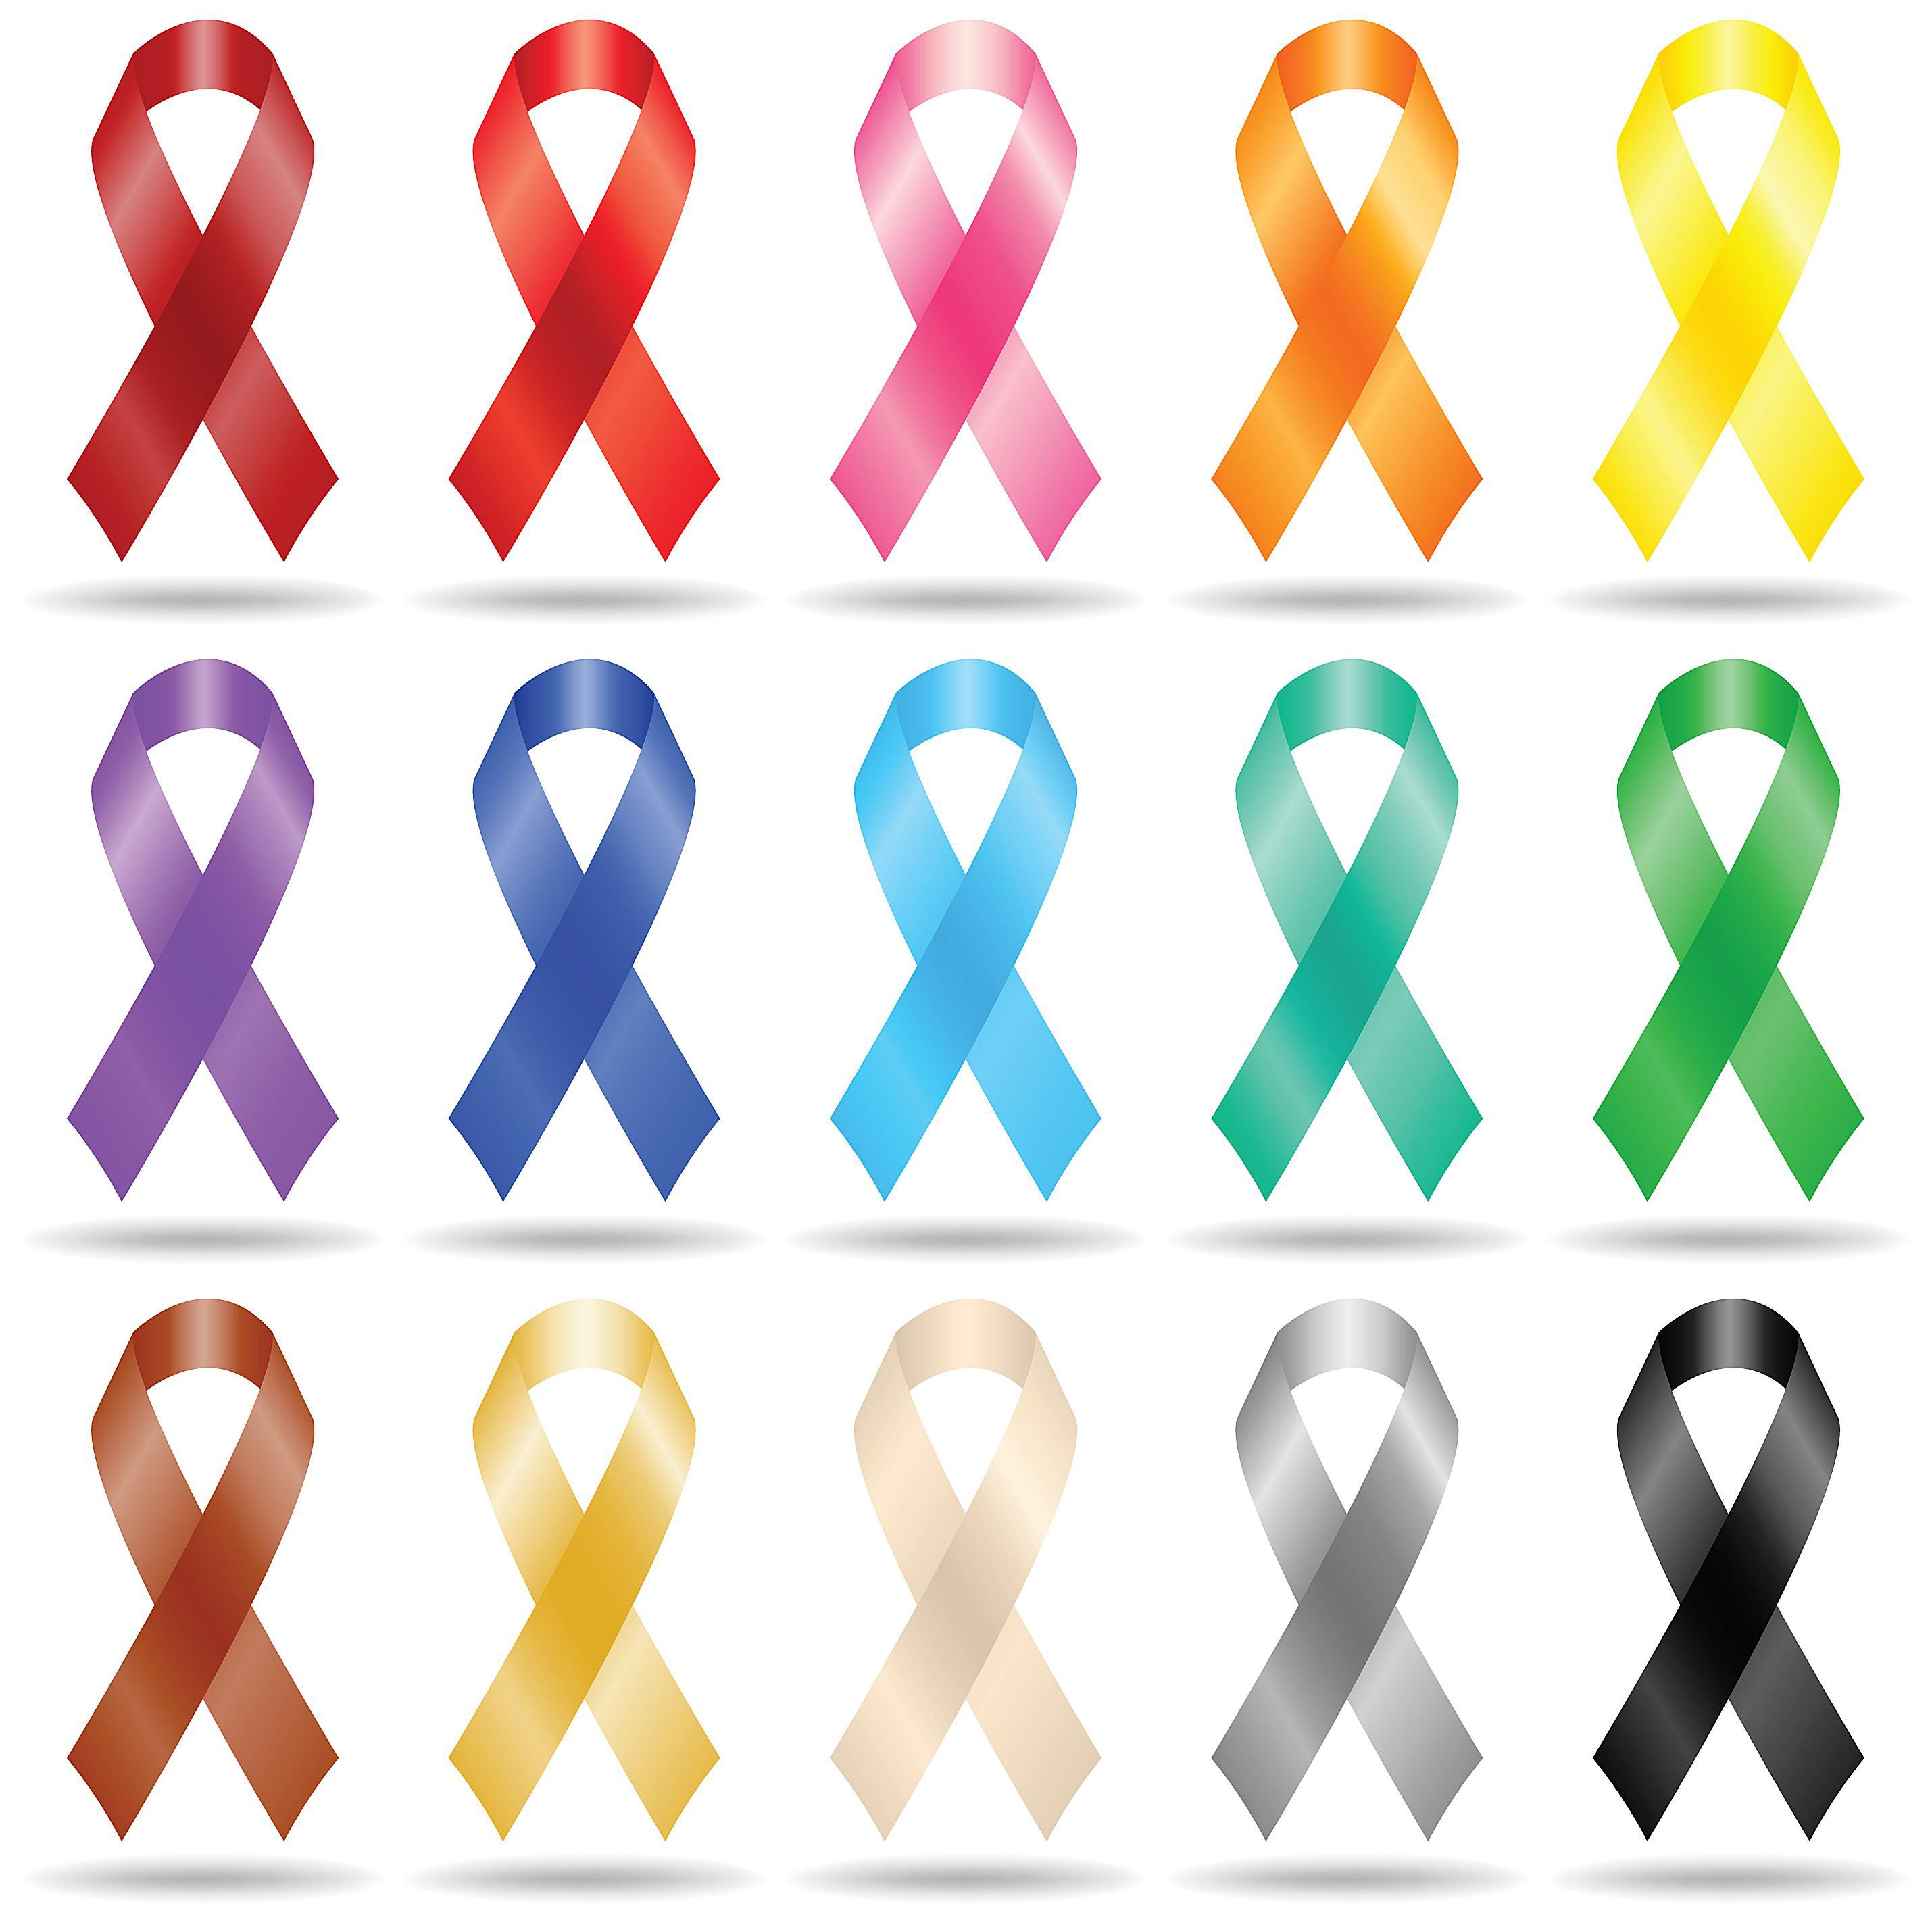 List Of Colors And Months For Cancer Ribbons HD Wallpapers Download Free Images Wallpaper [wallpaper896.blogspot.com]